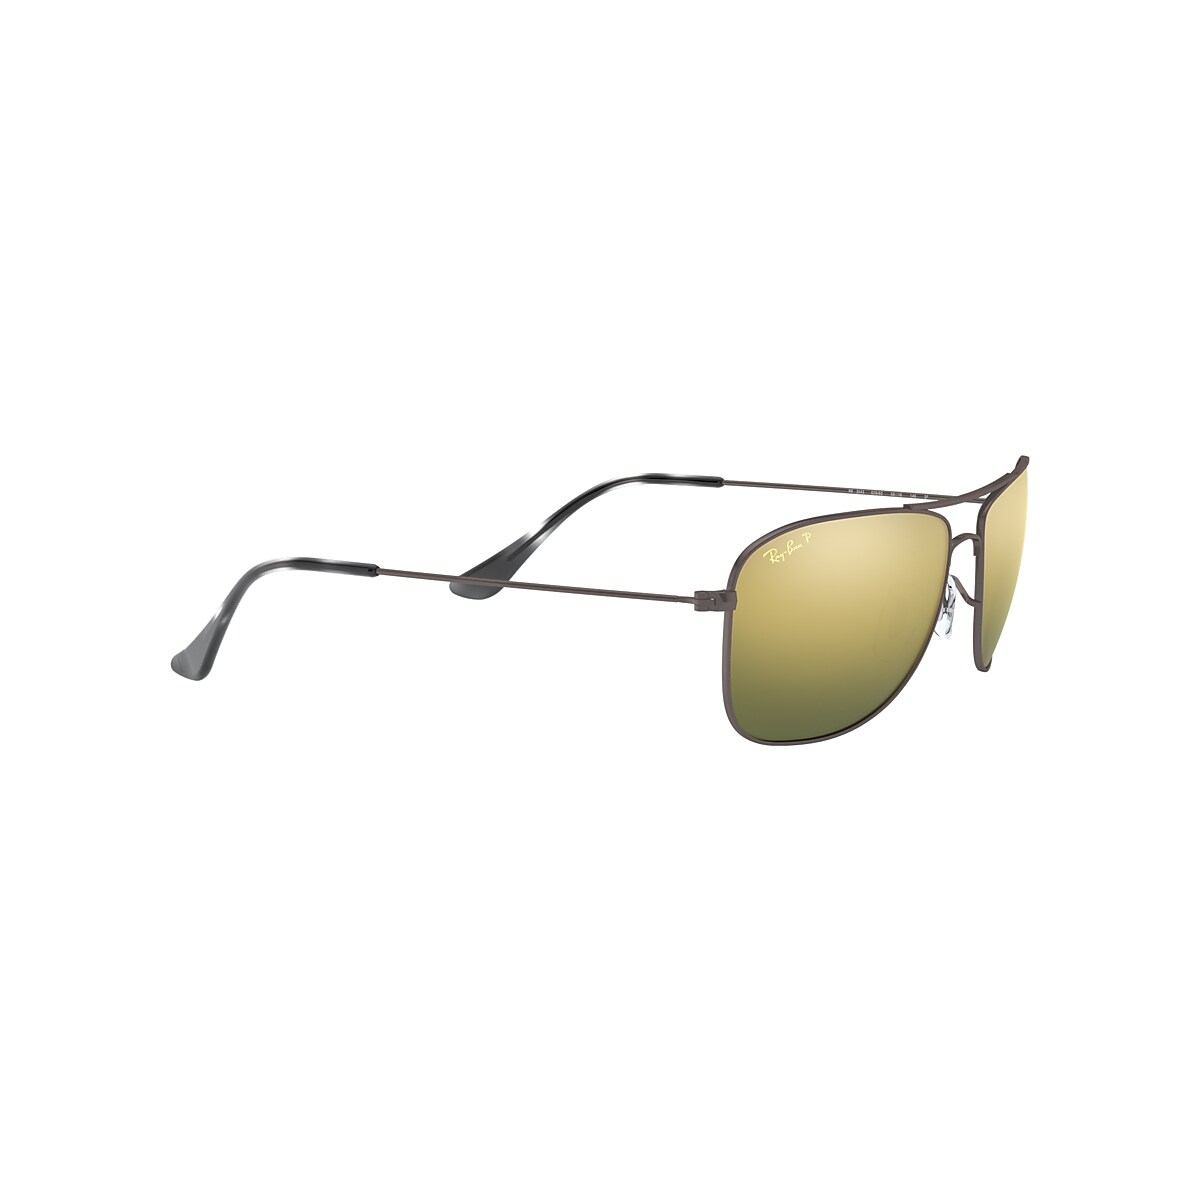 Rb3543 Chromance Sunglasses in Gunmetal and Green | Ray-Ban®